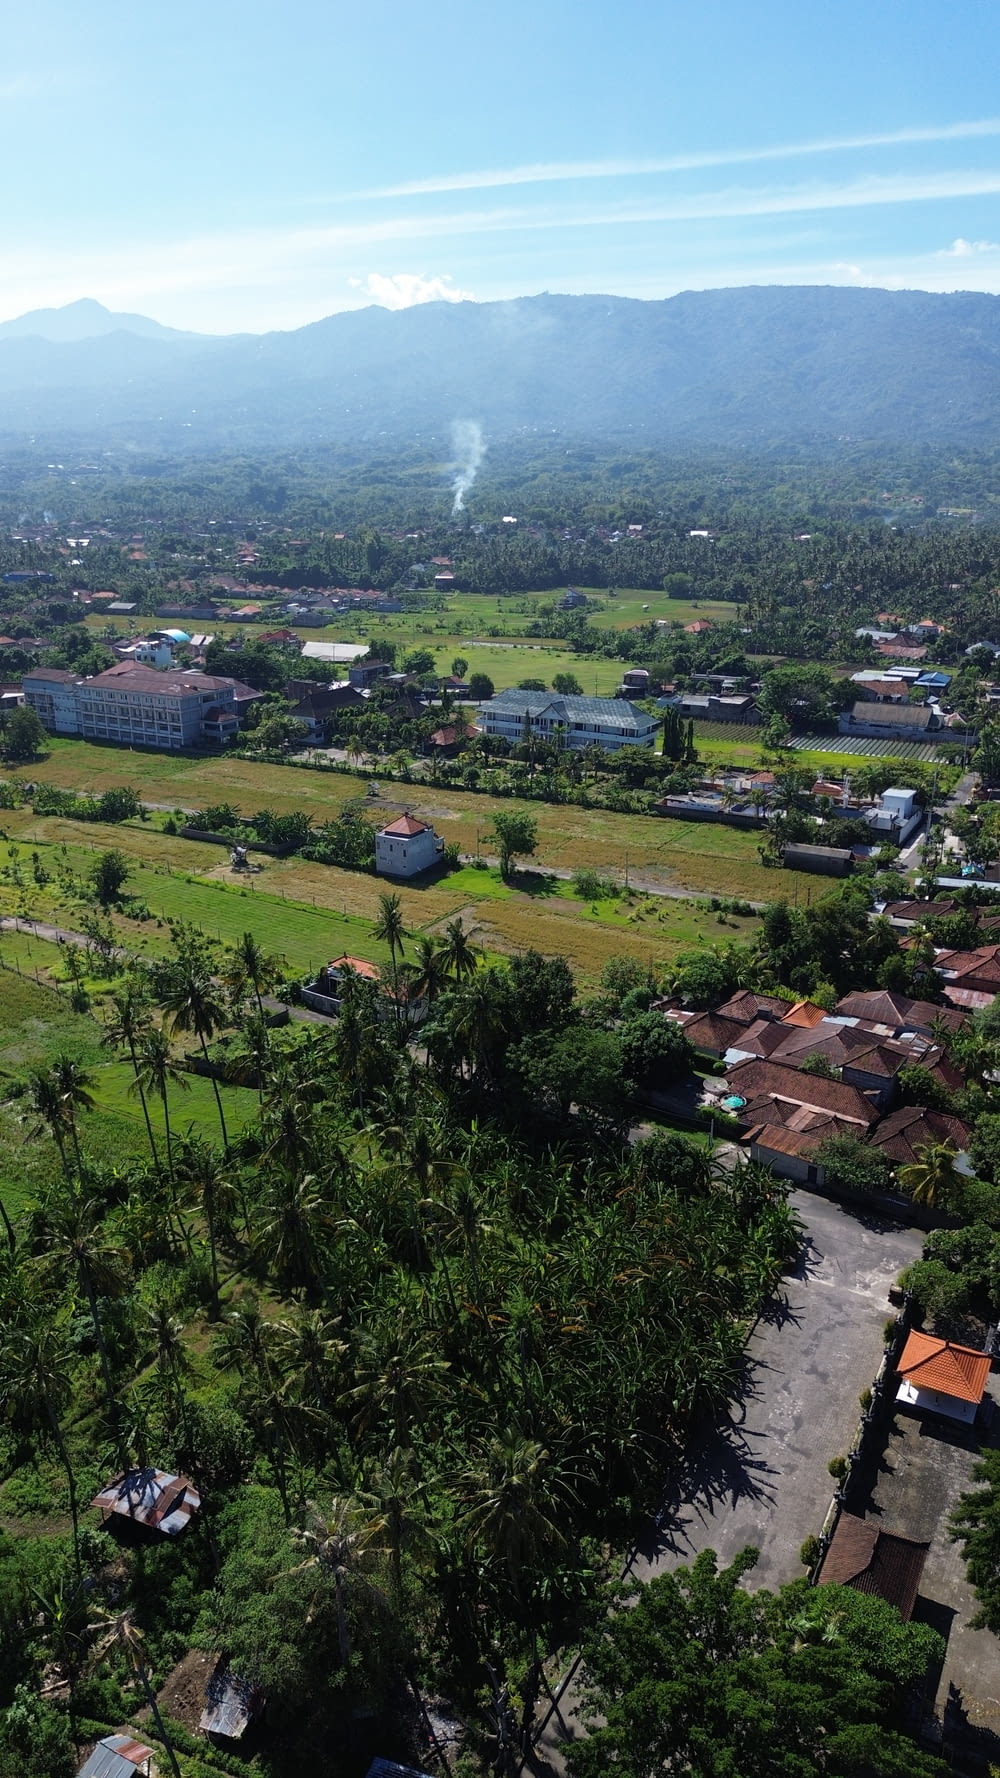 an aerial view of a small town surrounded by trees